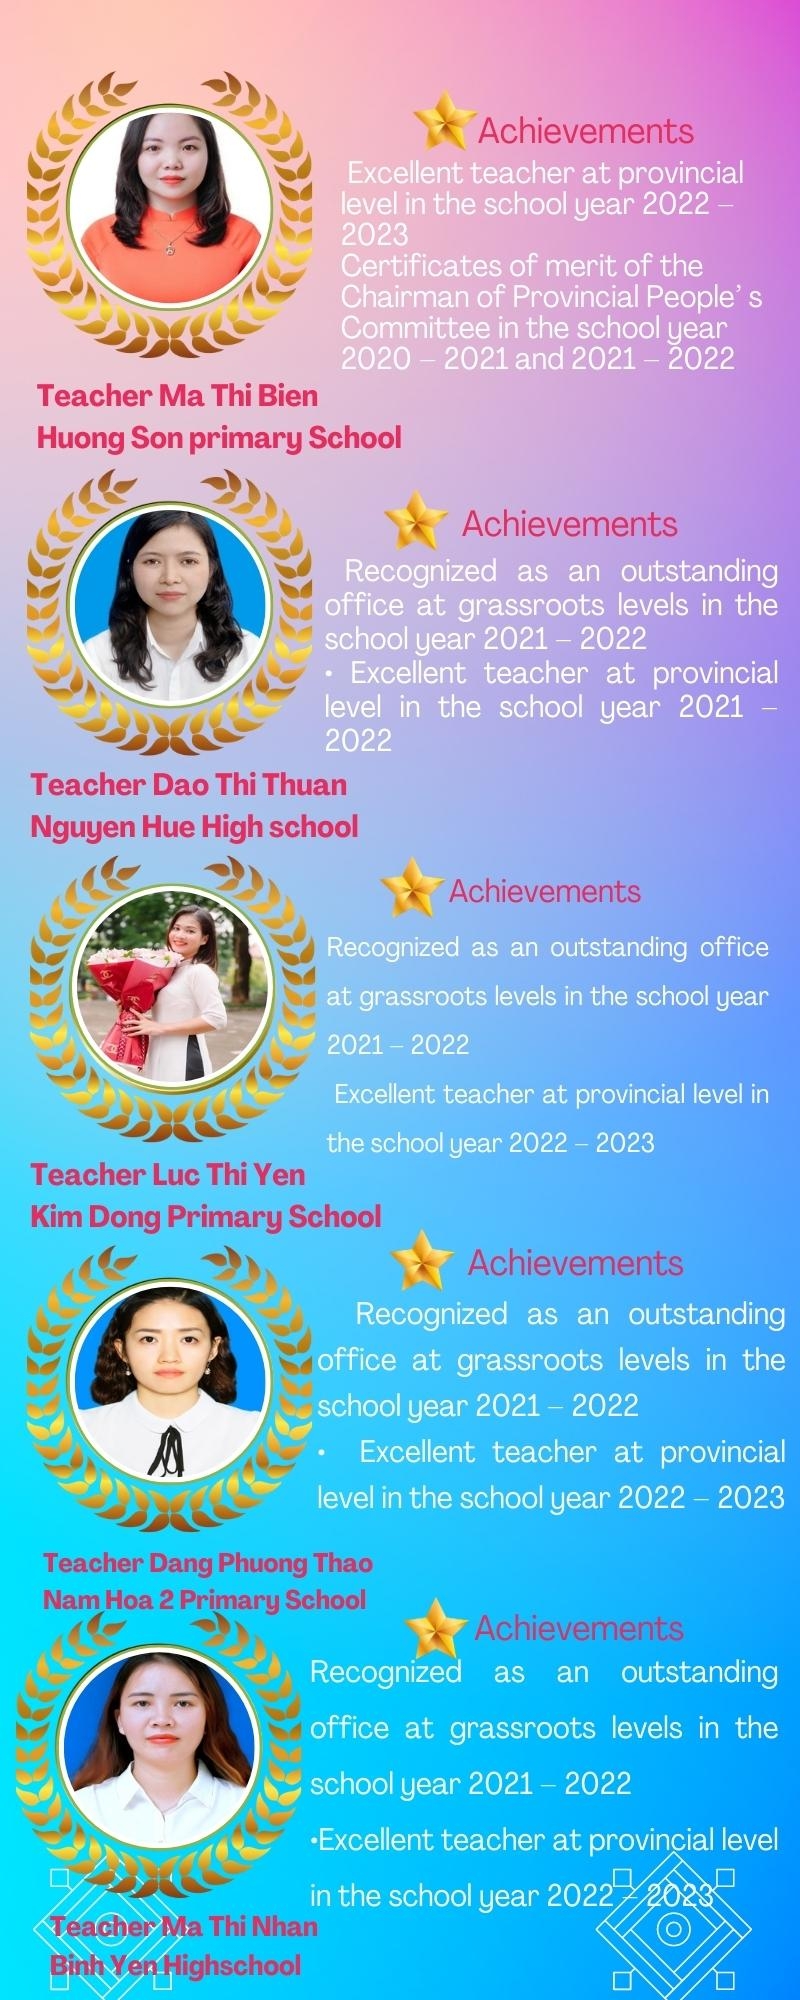 Thai Nguyen Province: Thai Nguyen's typical young teachers